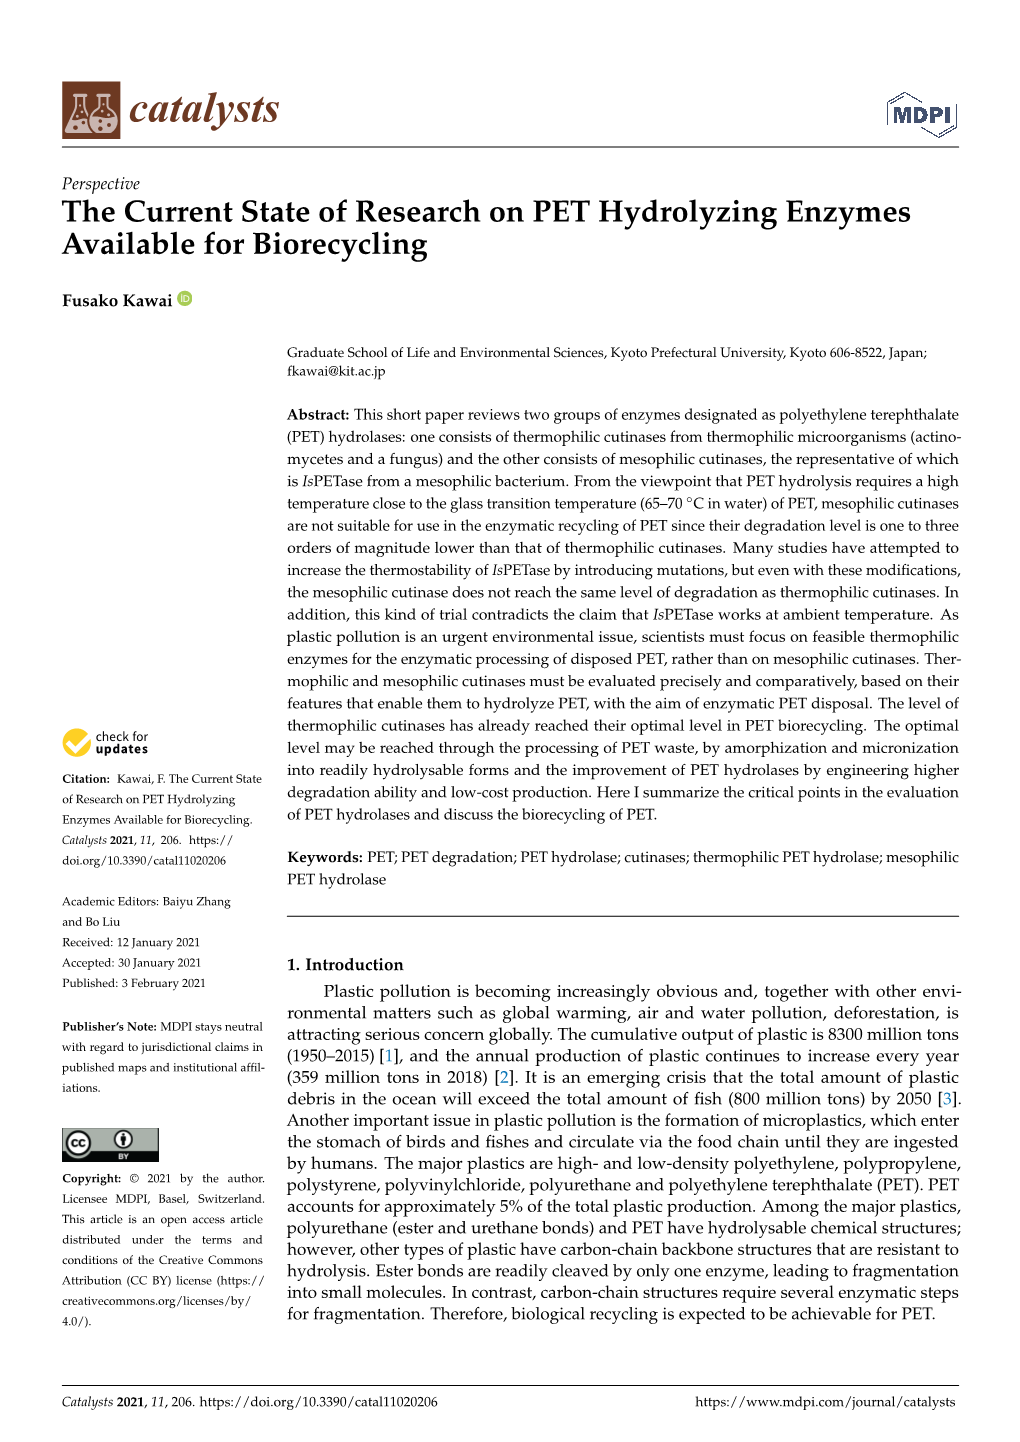 The Current State of Research on PET Hydrolyzing Enzymes Available for Biorecycling